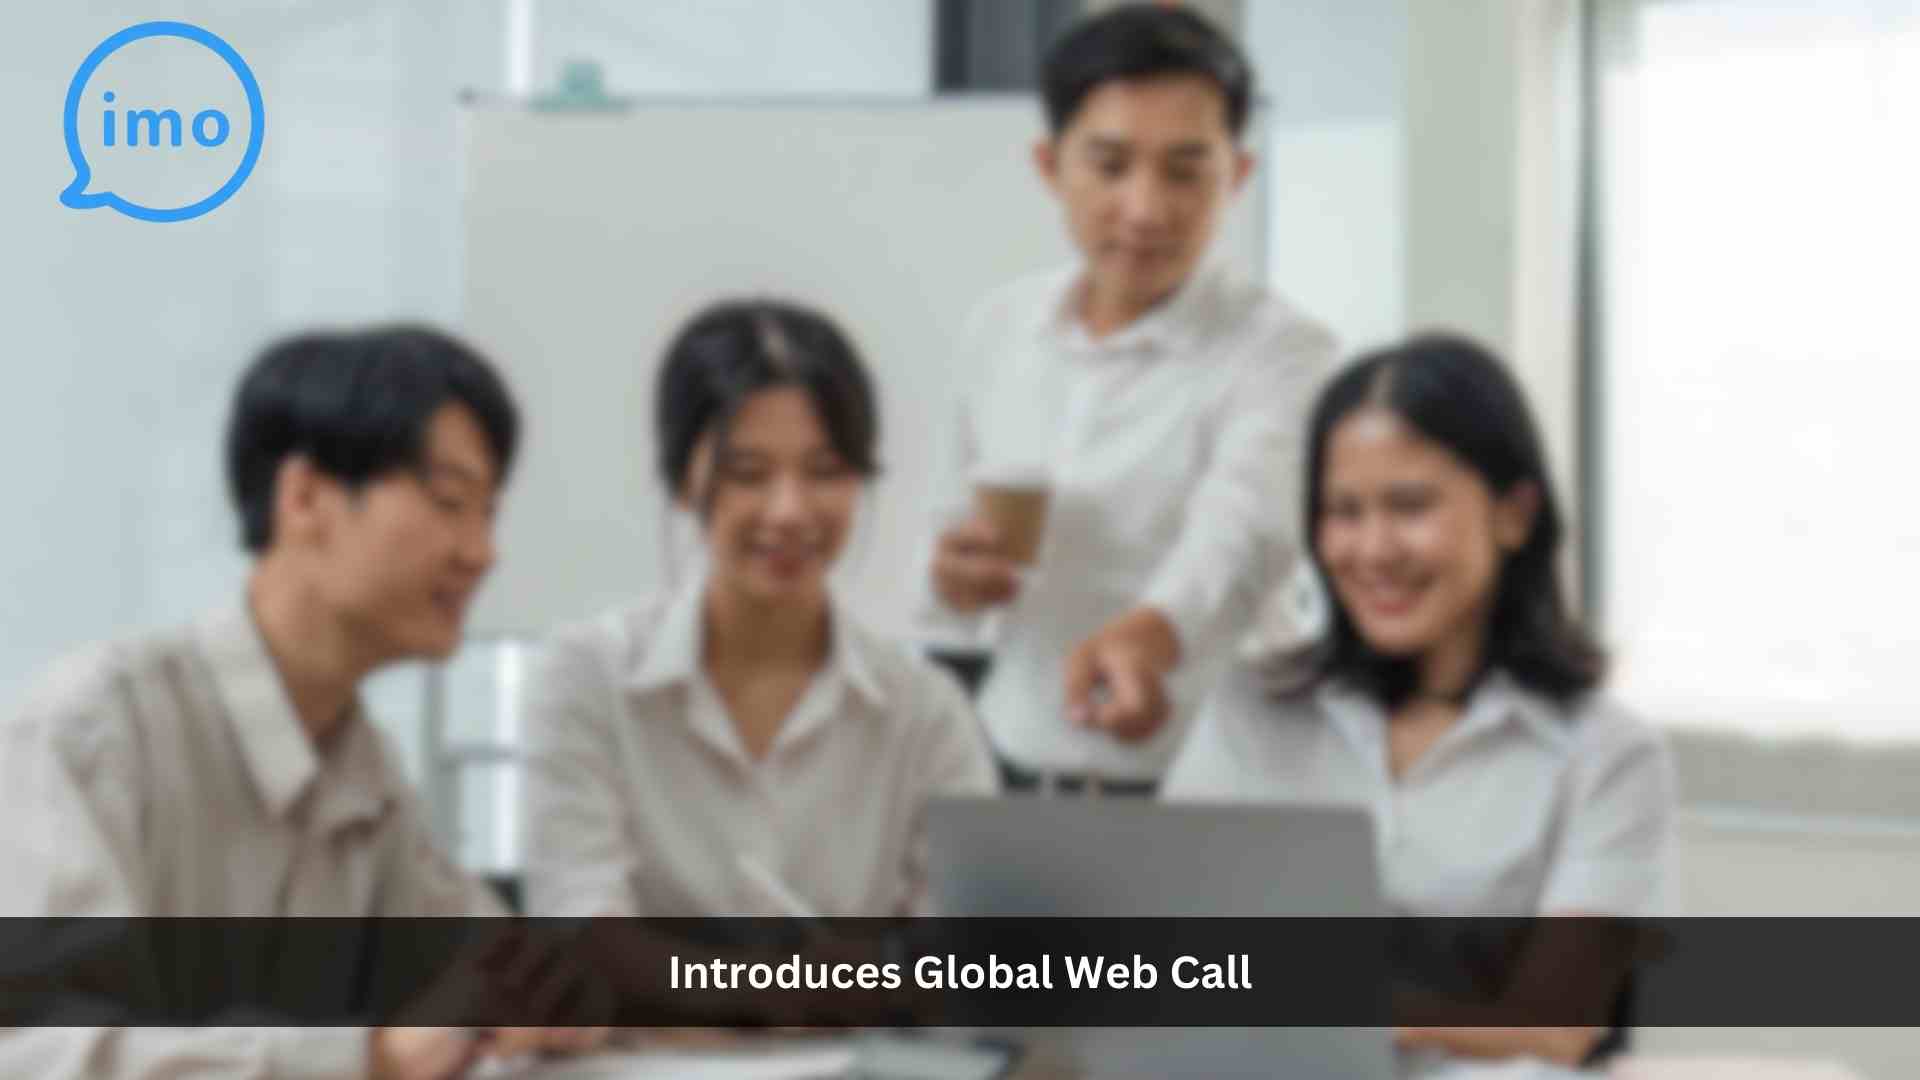 imo Introduces Global Web Call for Safer Cross-Platform Communication